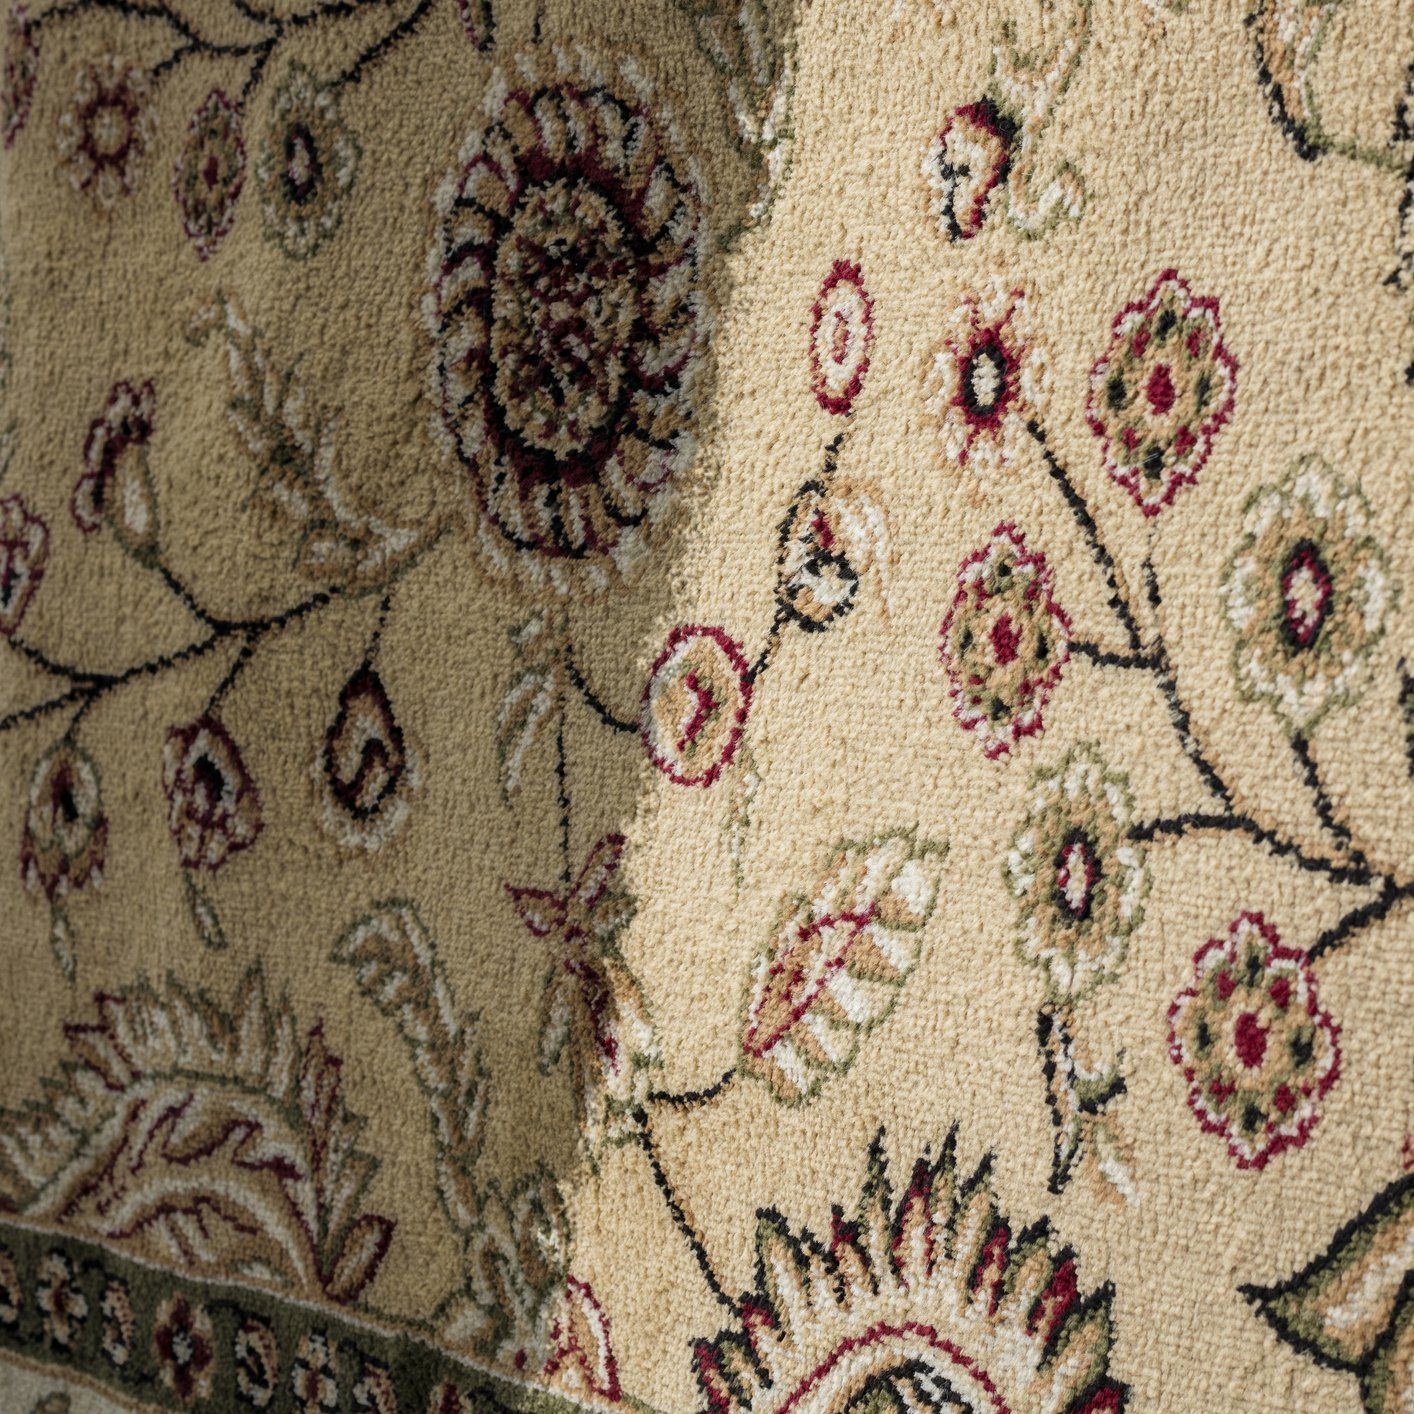 Oriental rug cleaning - Cleaning of carpets in Milwaukee, WI